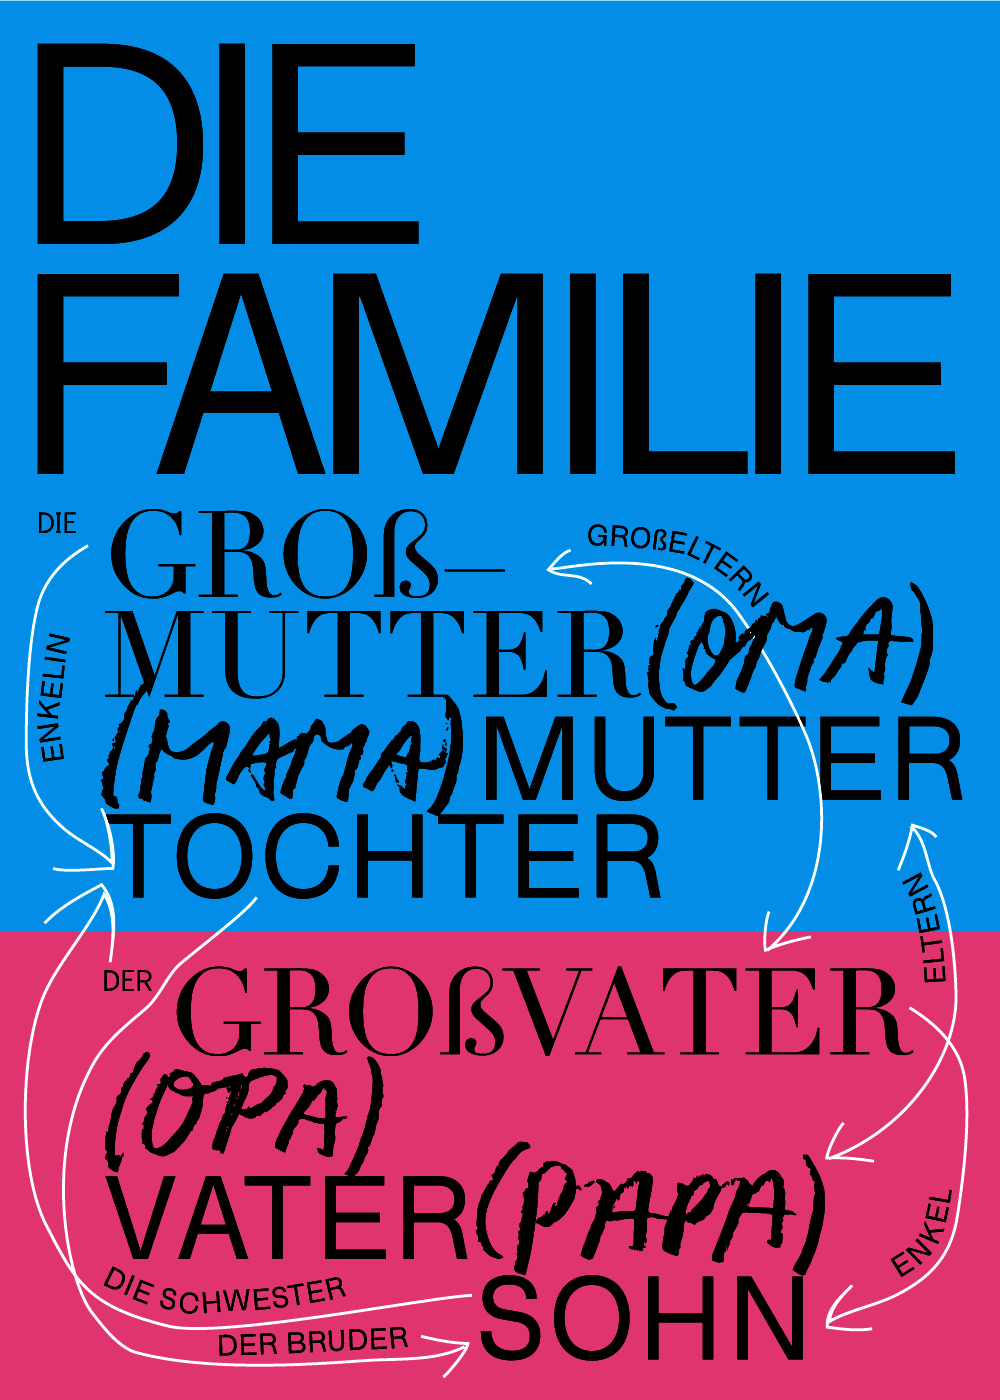 A typographic poster explaining family relations in German